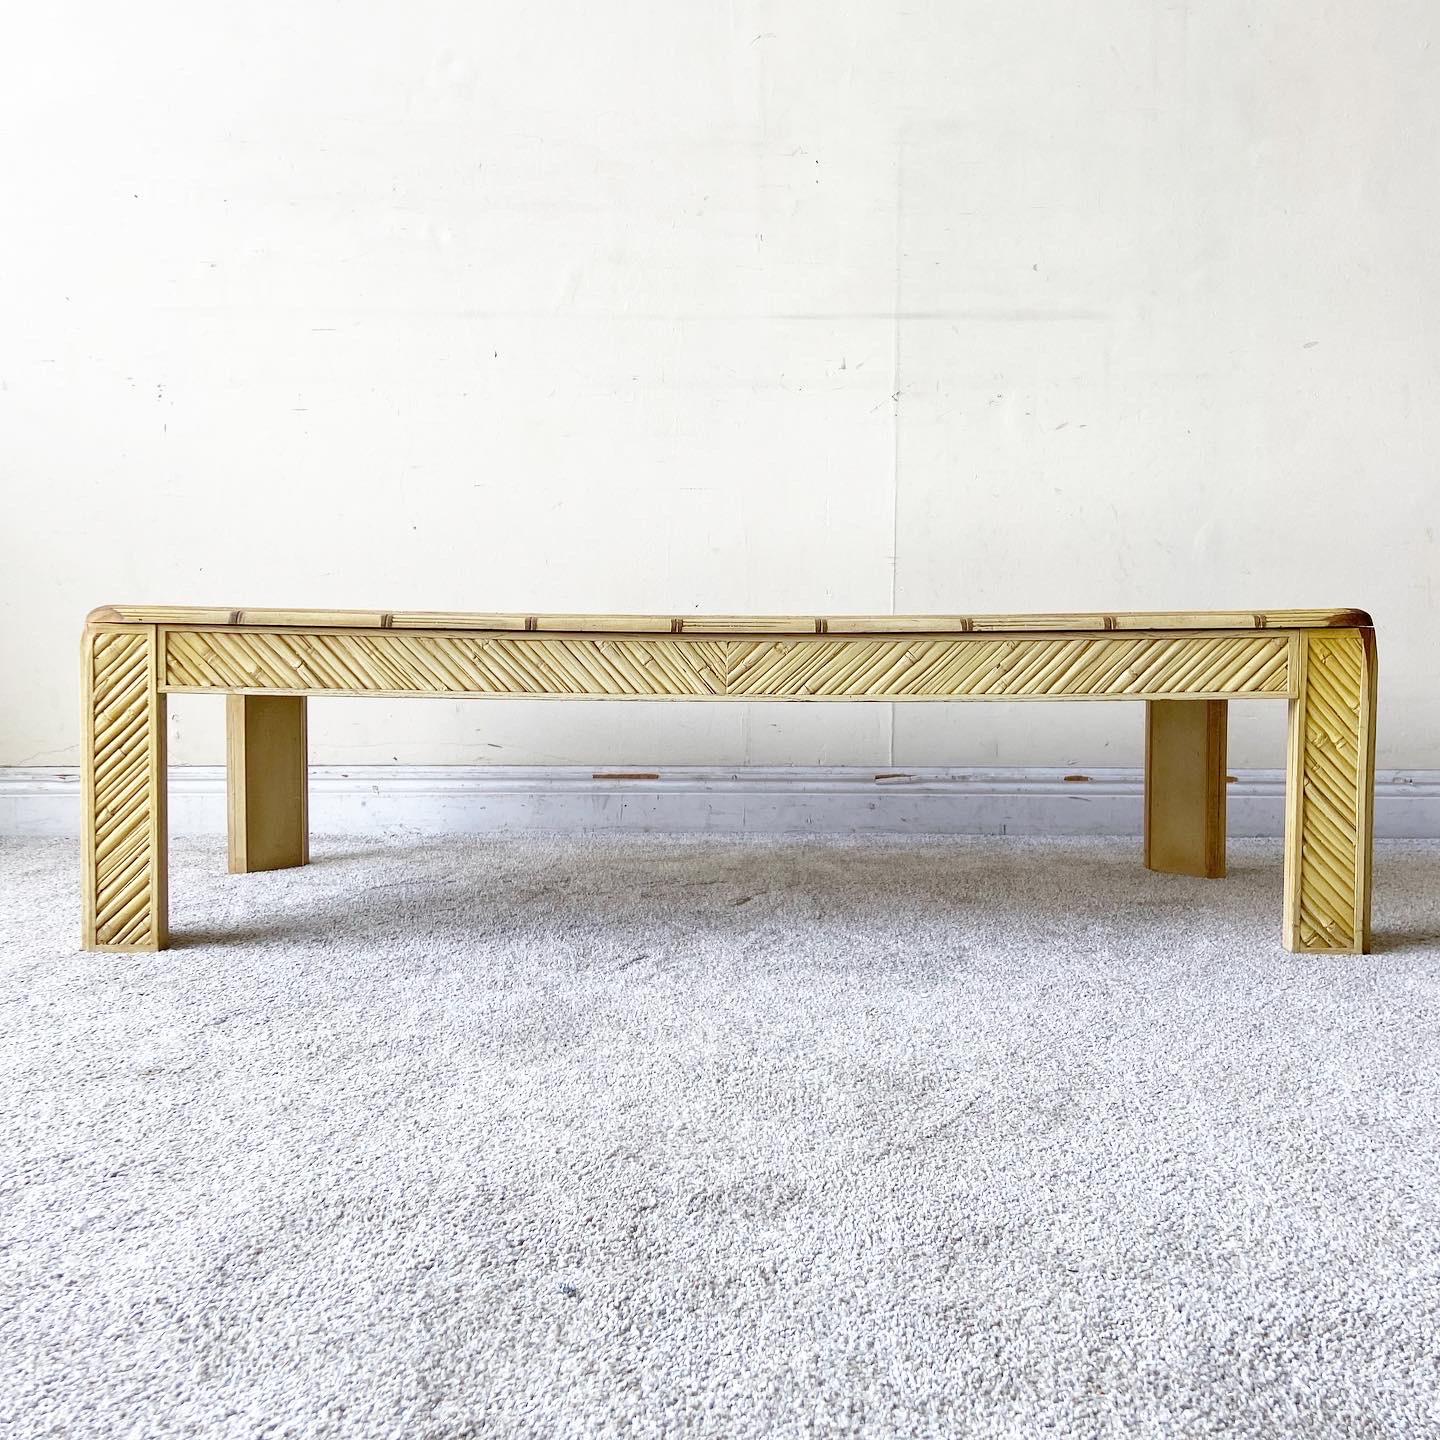 Amazing vintage palm beach boho chic rectangular coffee table. Features a glass top with a faux bamboo frame with distressed edges.